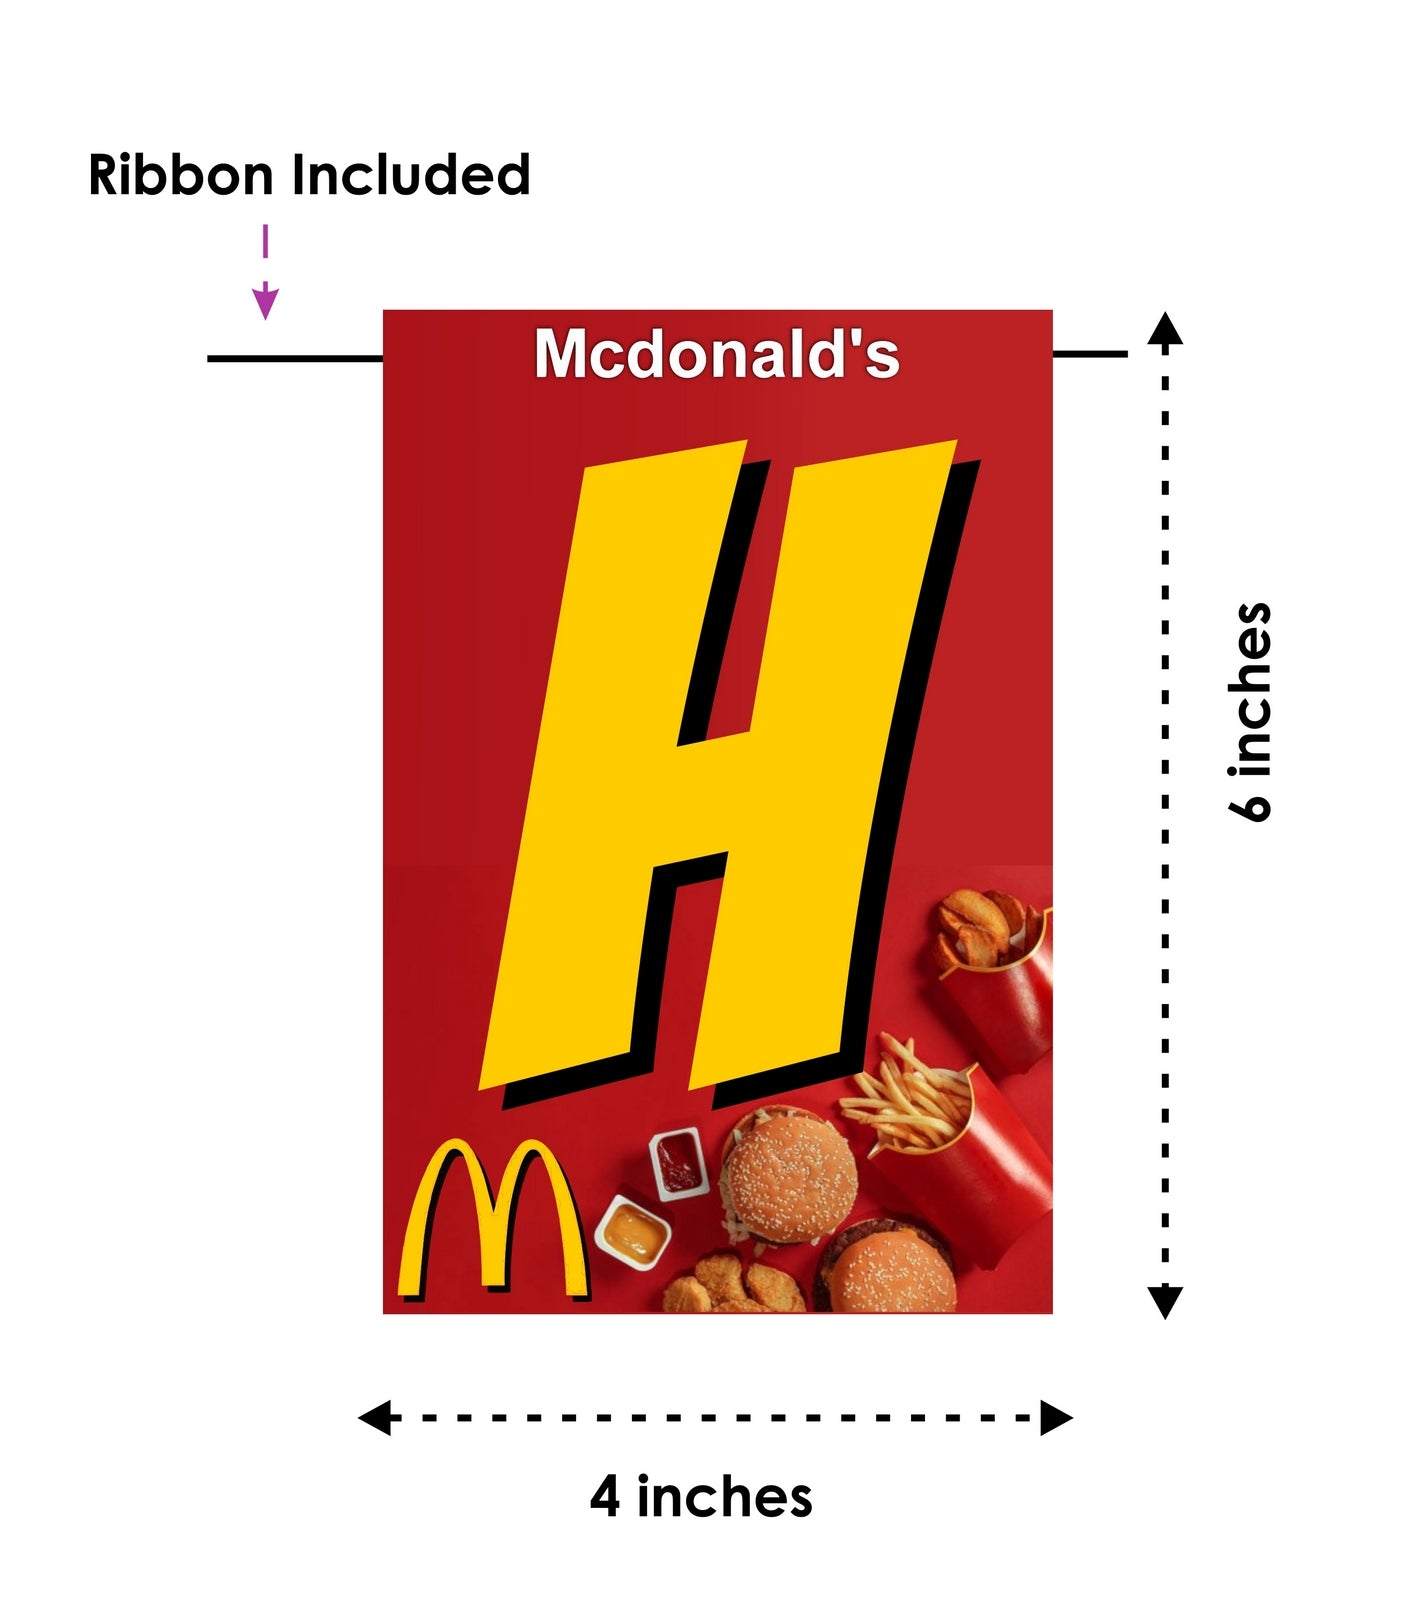 Mcdonalds Theme Happy Birthday Decoration Hanging and Banner for Photo Shoot Backdrop and Theme Party